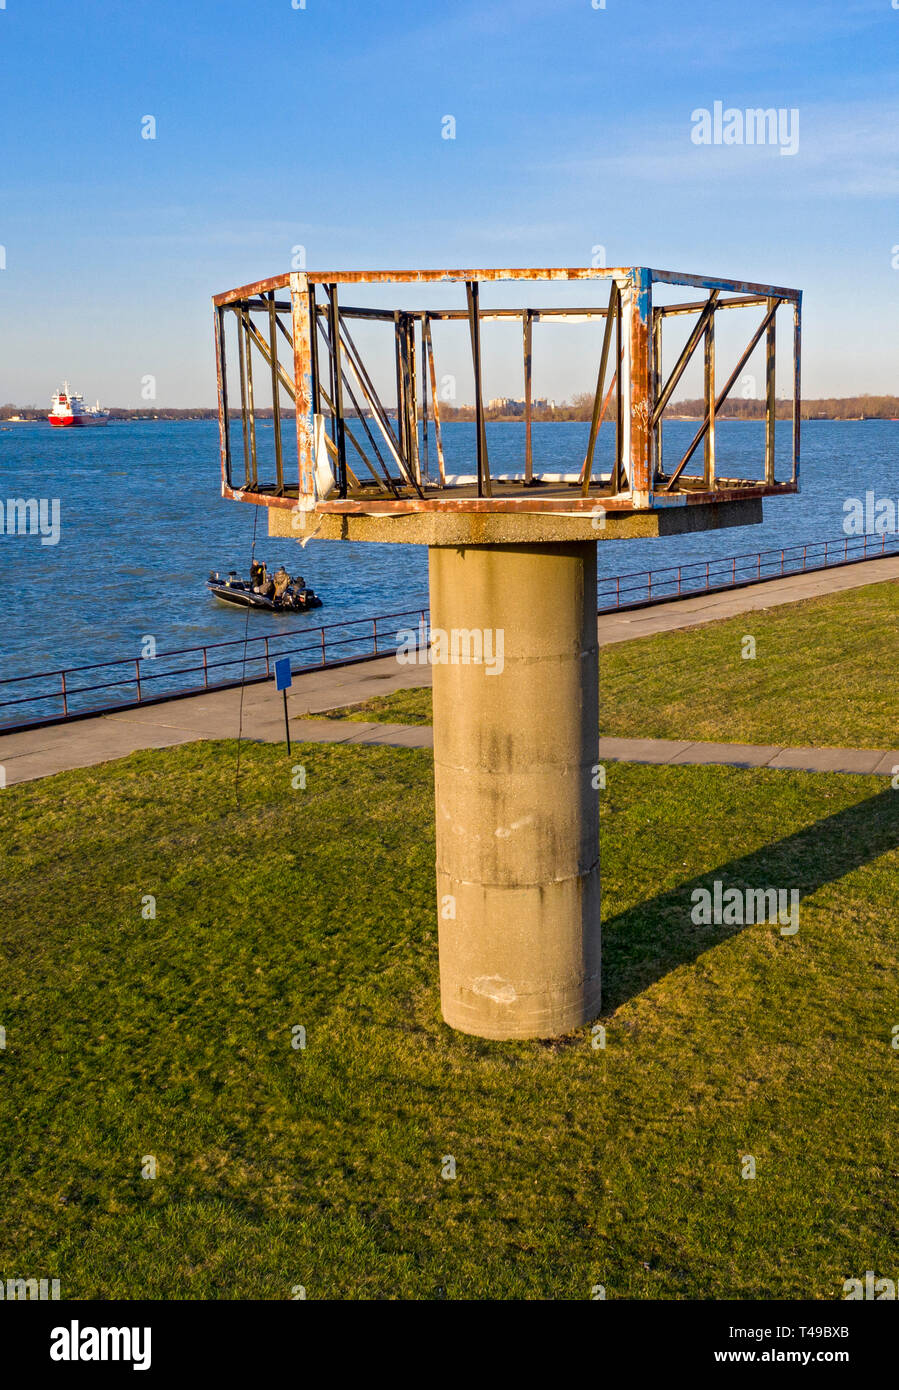 Detroit, Michigan - The base of a radar tower is all that is left of a Cold War-era Nike missile site on the Detroit River. Hundreds of the anti-aircr Stock Photo